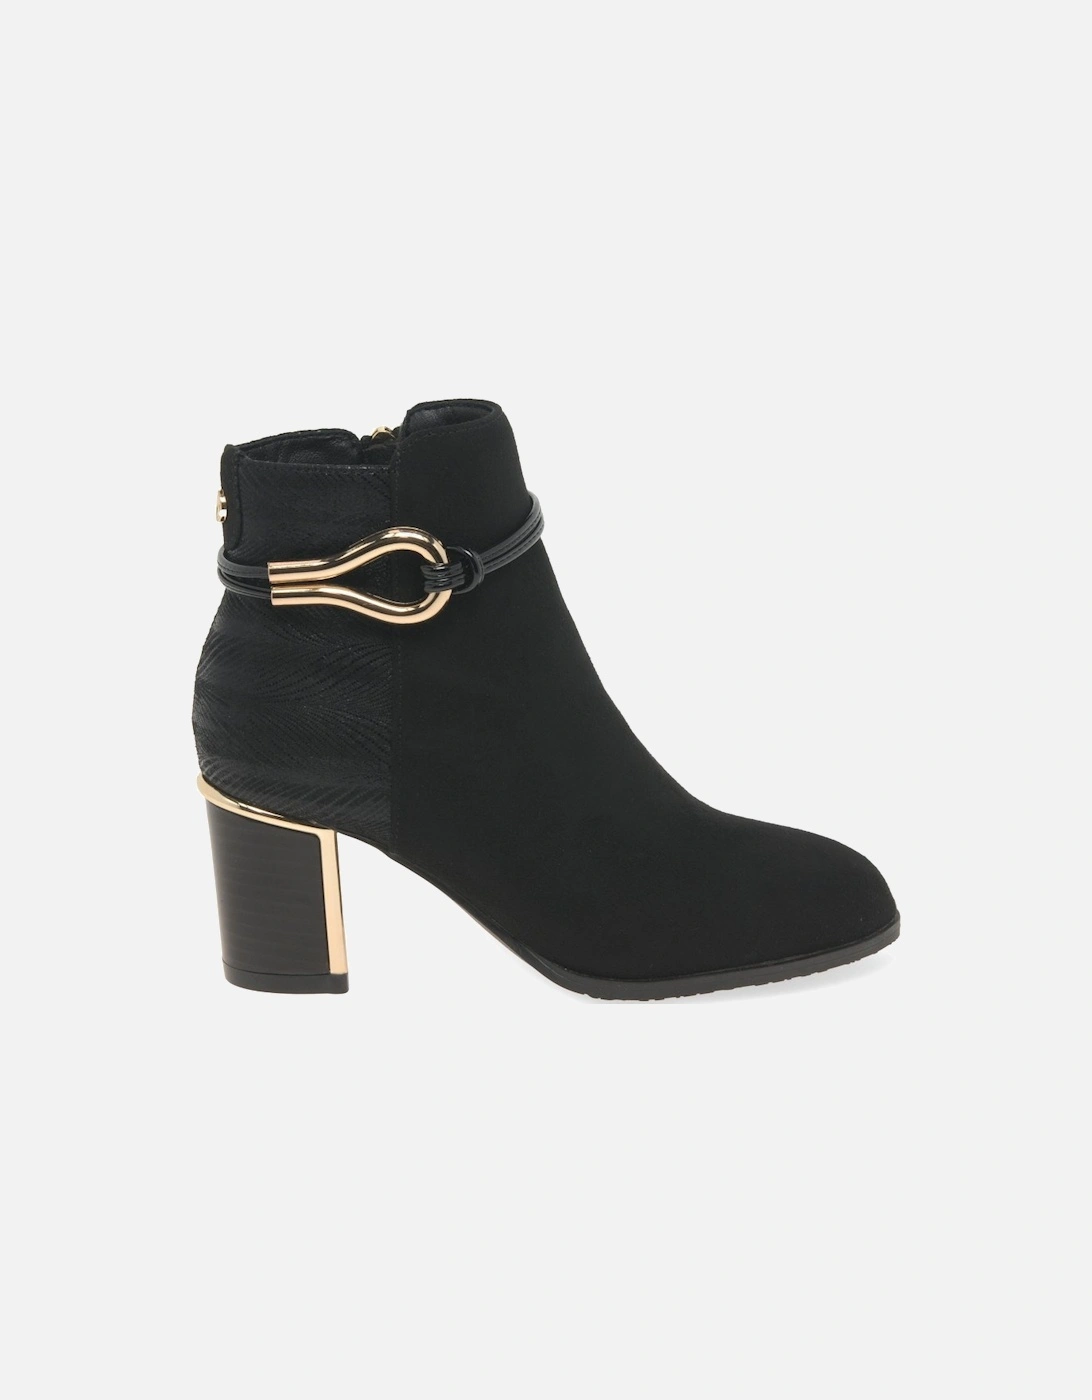 Autumn Womens Ankle Boots